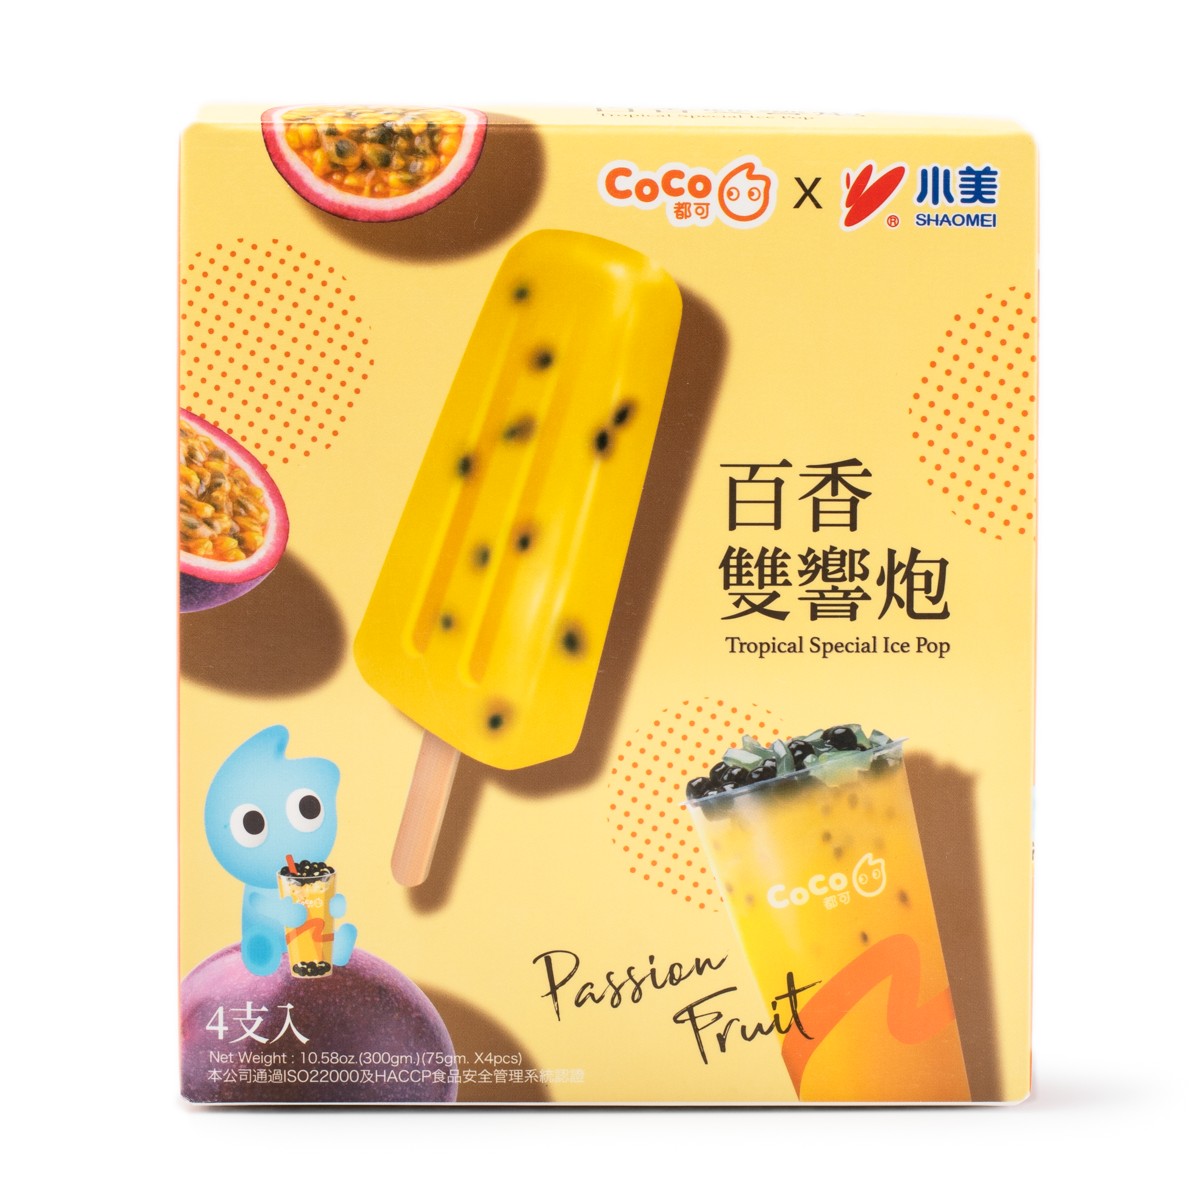 coco-x-shaomei-passion-fruit-tropical-special-ice-pop